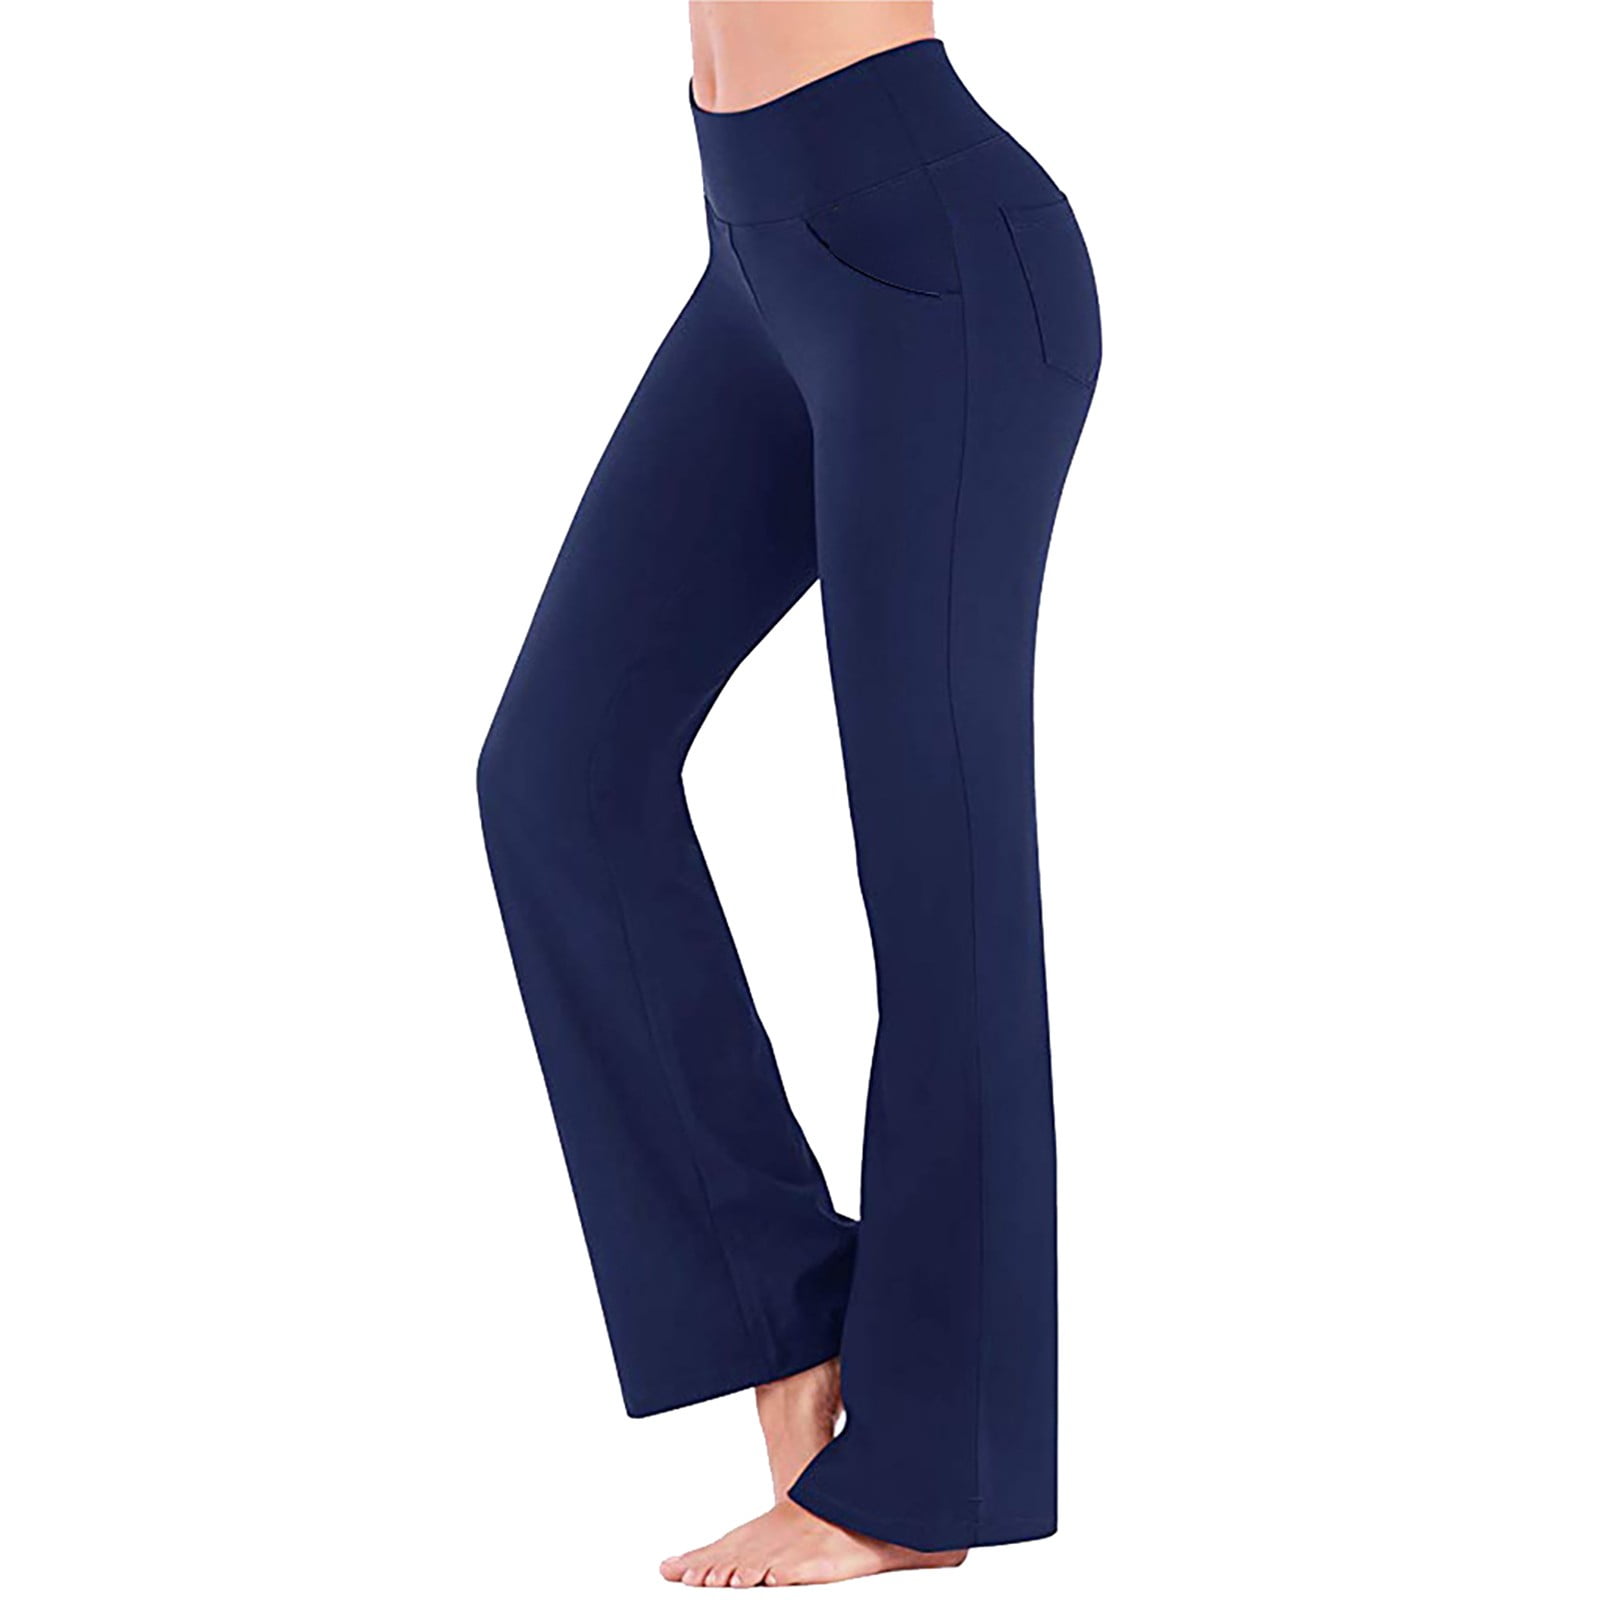  Yuiboo Solid Color Pure Plain Royal Blue High Waisted Yoga Pants  for Women Running Womens Athletic Pants X-Small : Clothing, Shoes & Jewelry